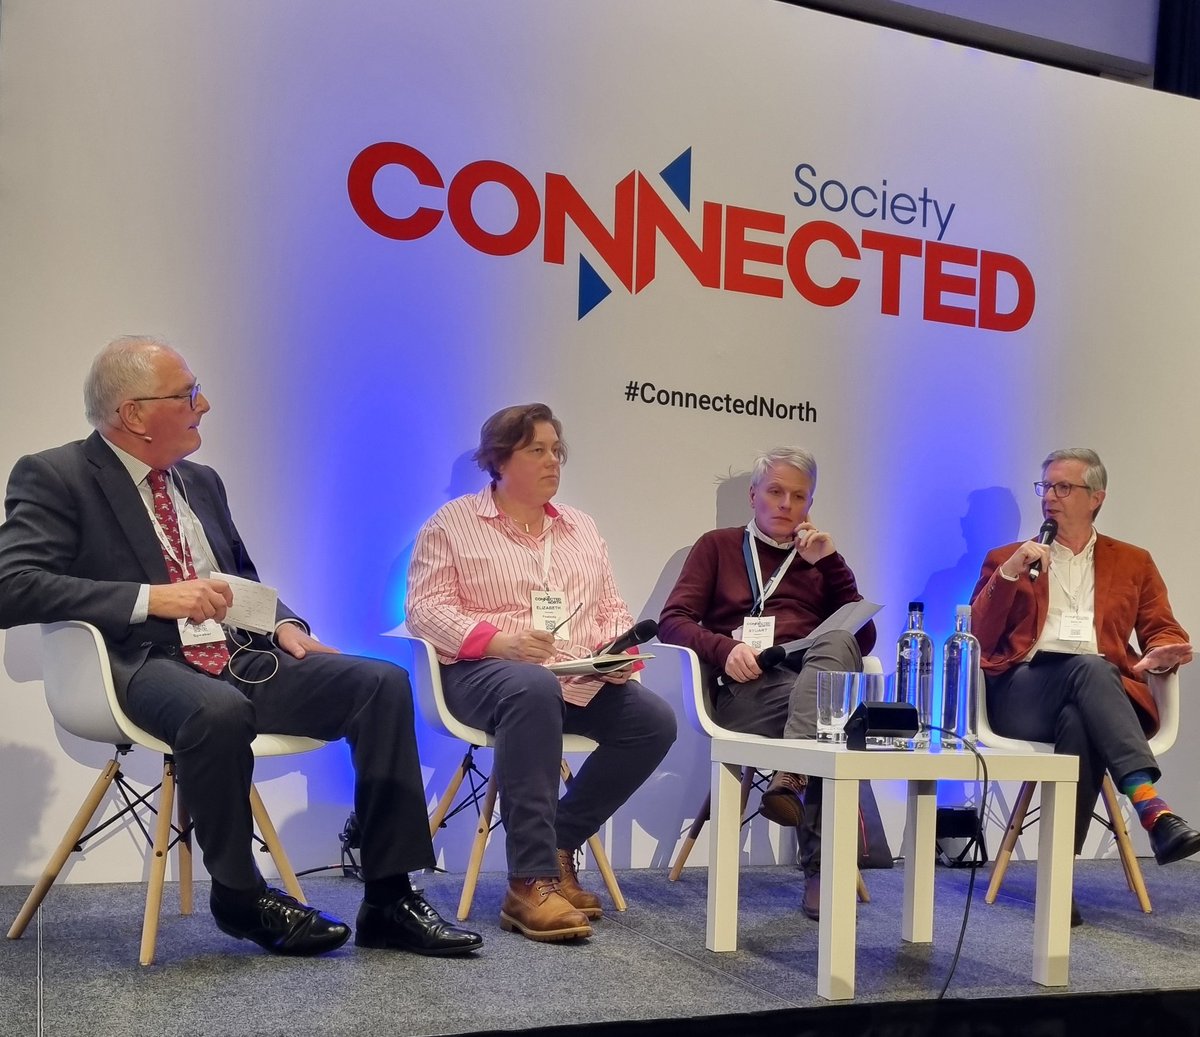 I enjoyed the #ConnectedNorth conference today. Great discussion and useful insights. @Knightsinwhites shared some insight from @wythenshawe_chg's efforts on this agenda too. You can always rely on a strong sock offering too....🧦